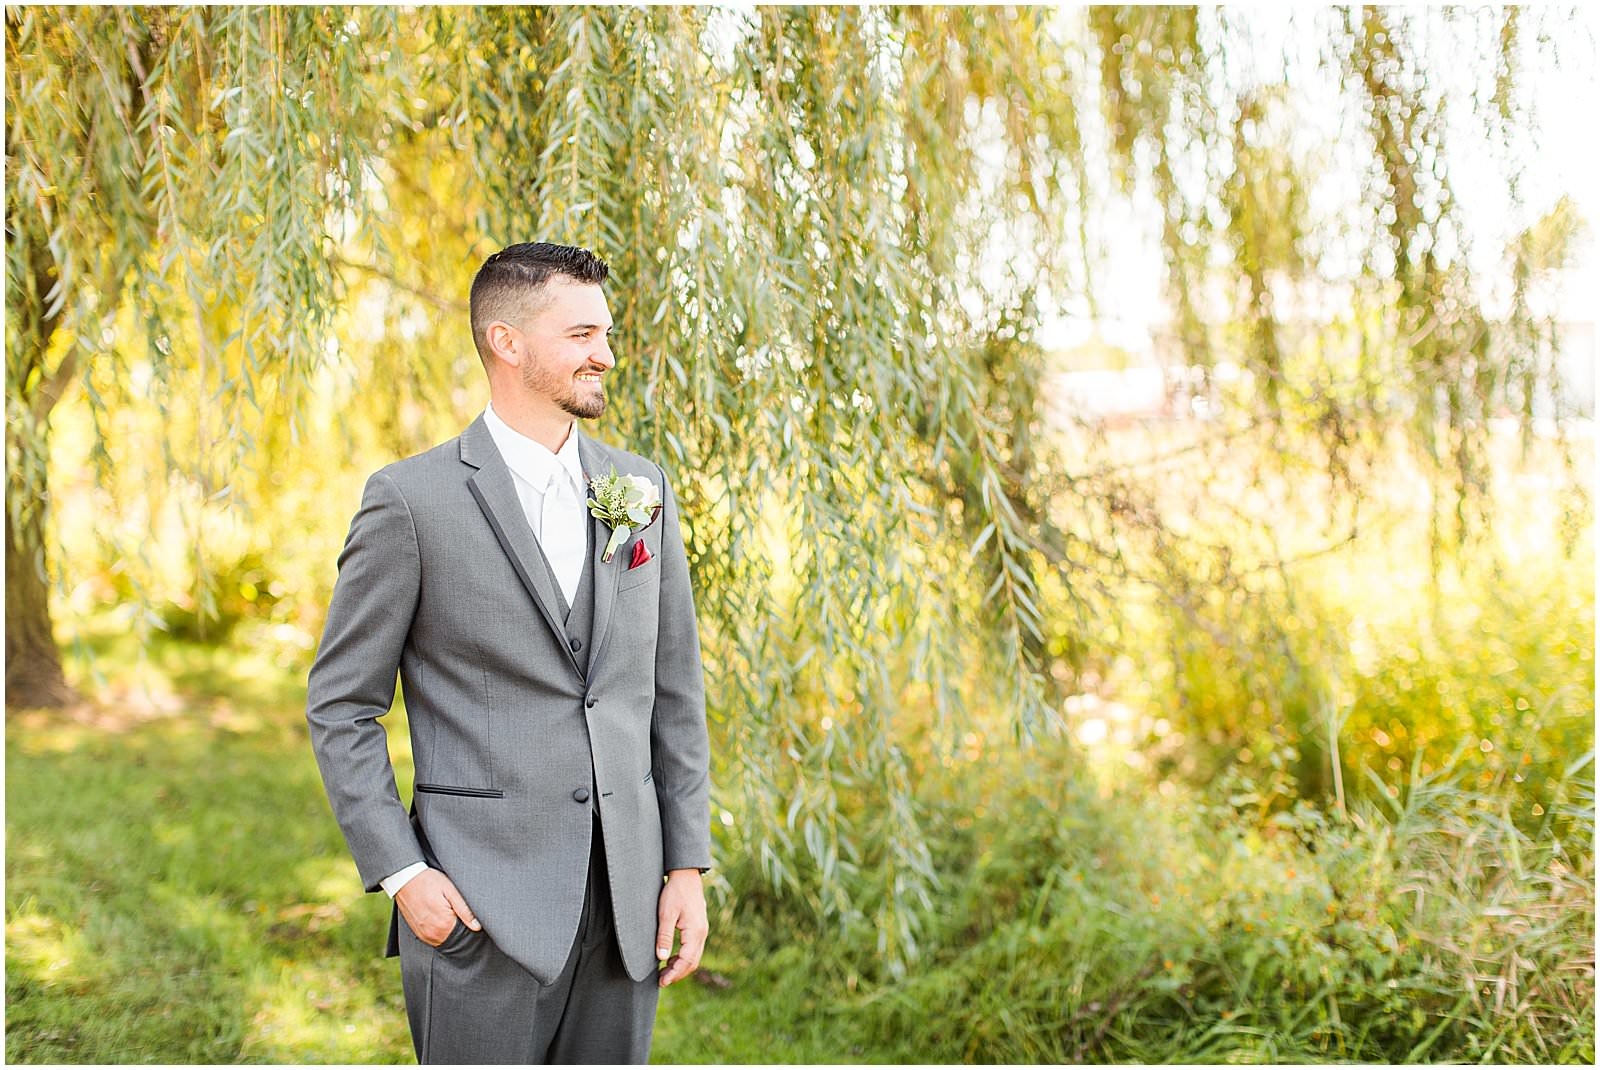 A Stunning Fall Wedding in Indianapolis, IN |. Sally and Andrew | Bret and Brandie Photography 0094.jpg